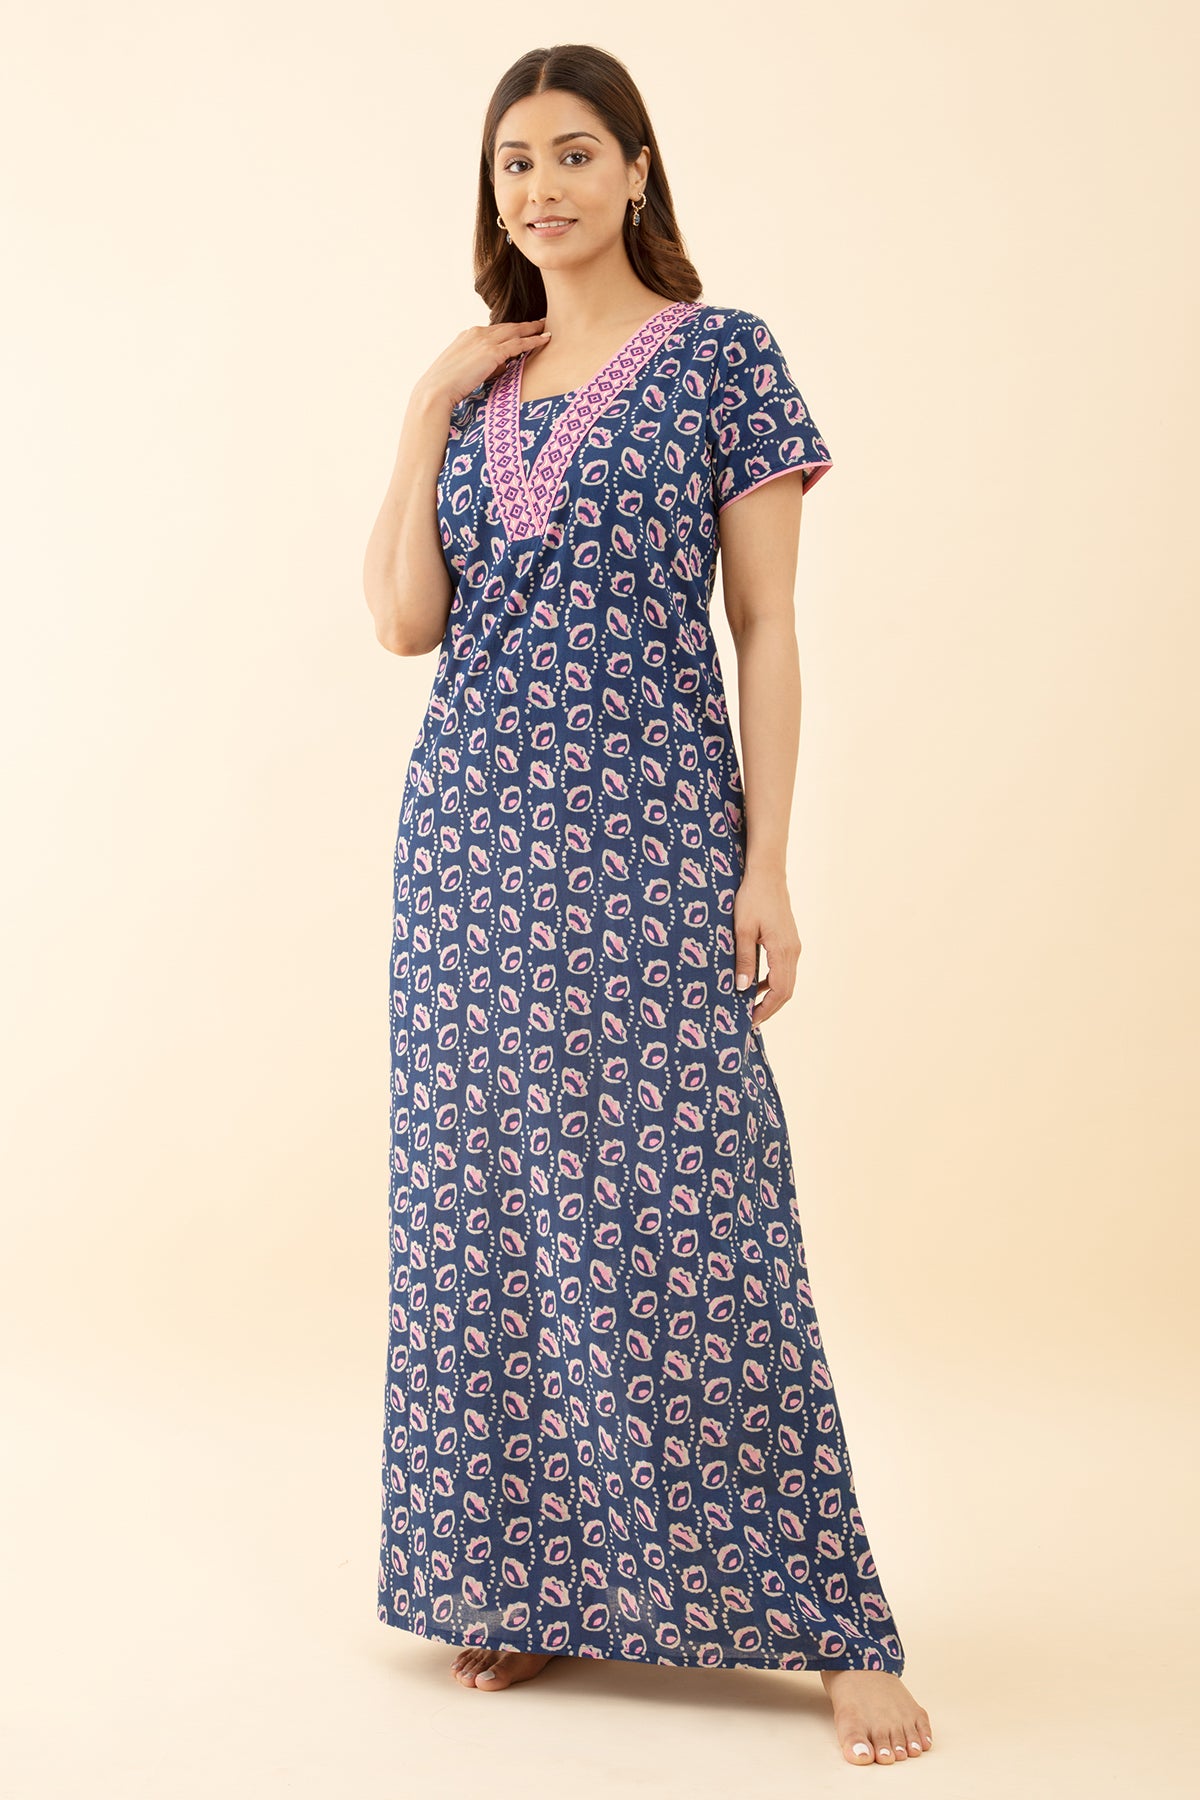 Blue Floral Nighty: Printed V-Neck Style